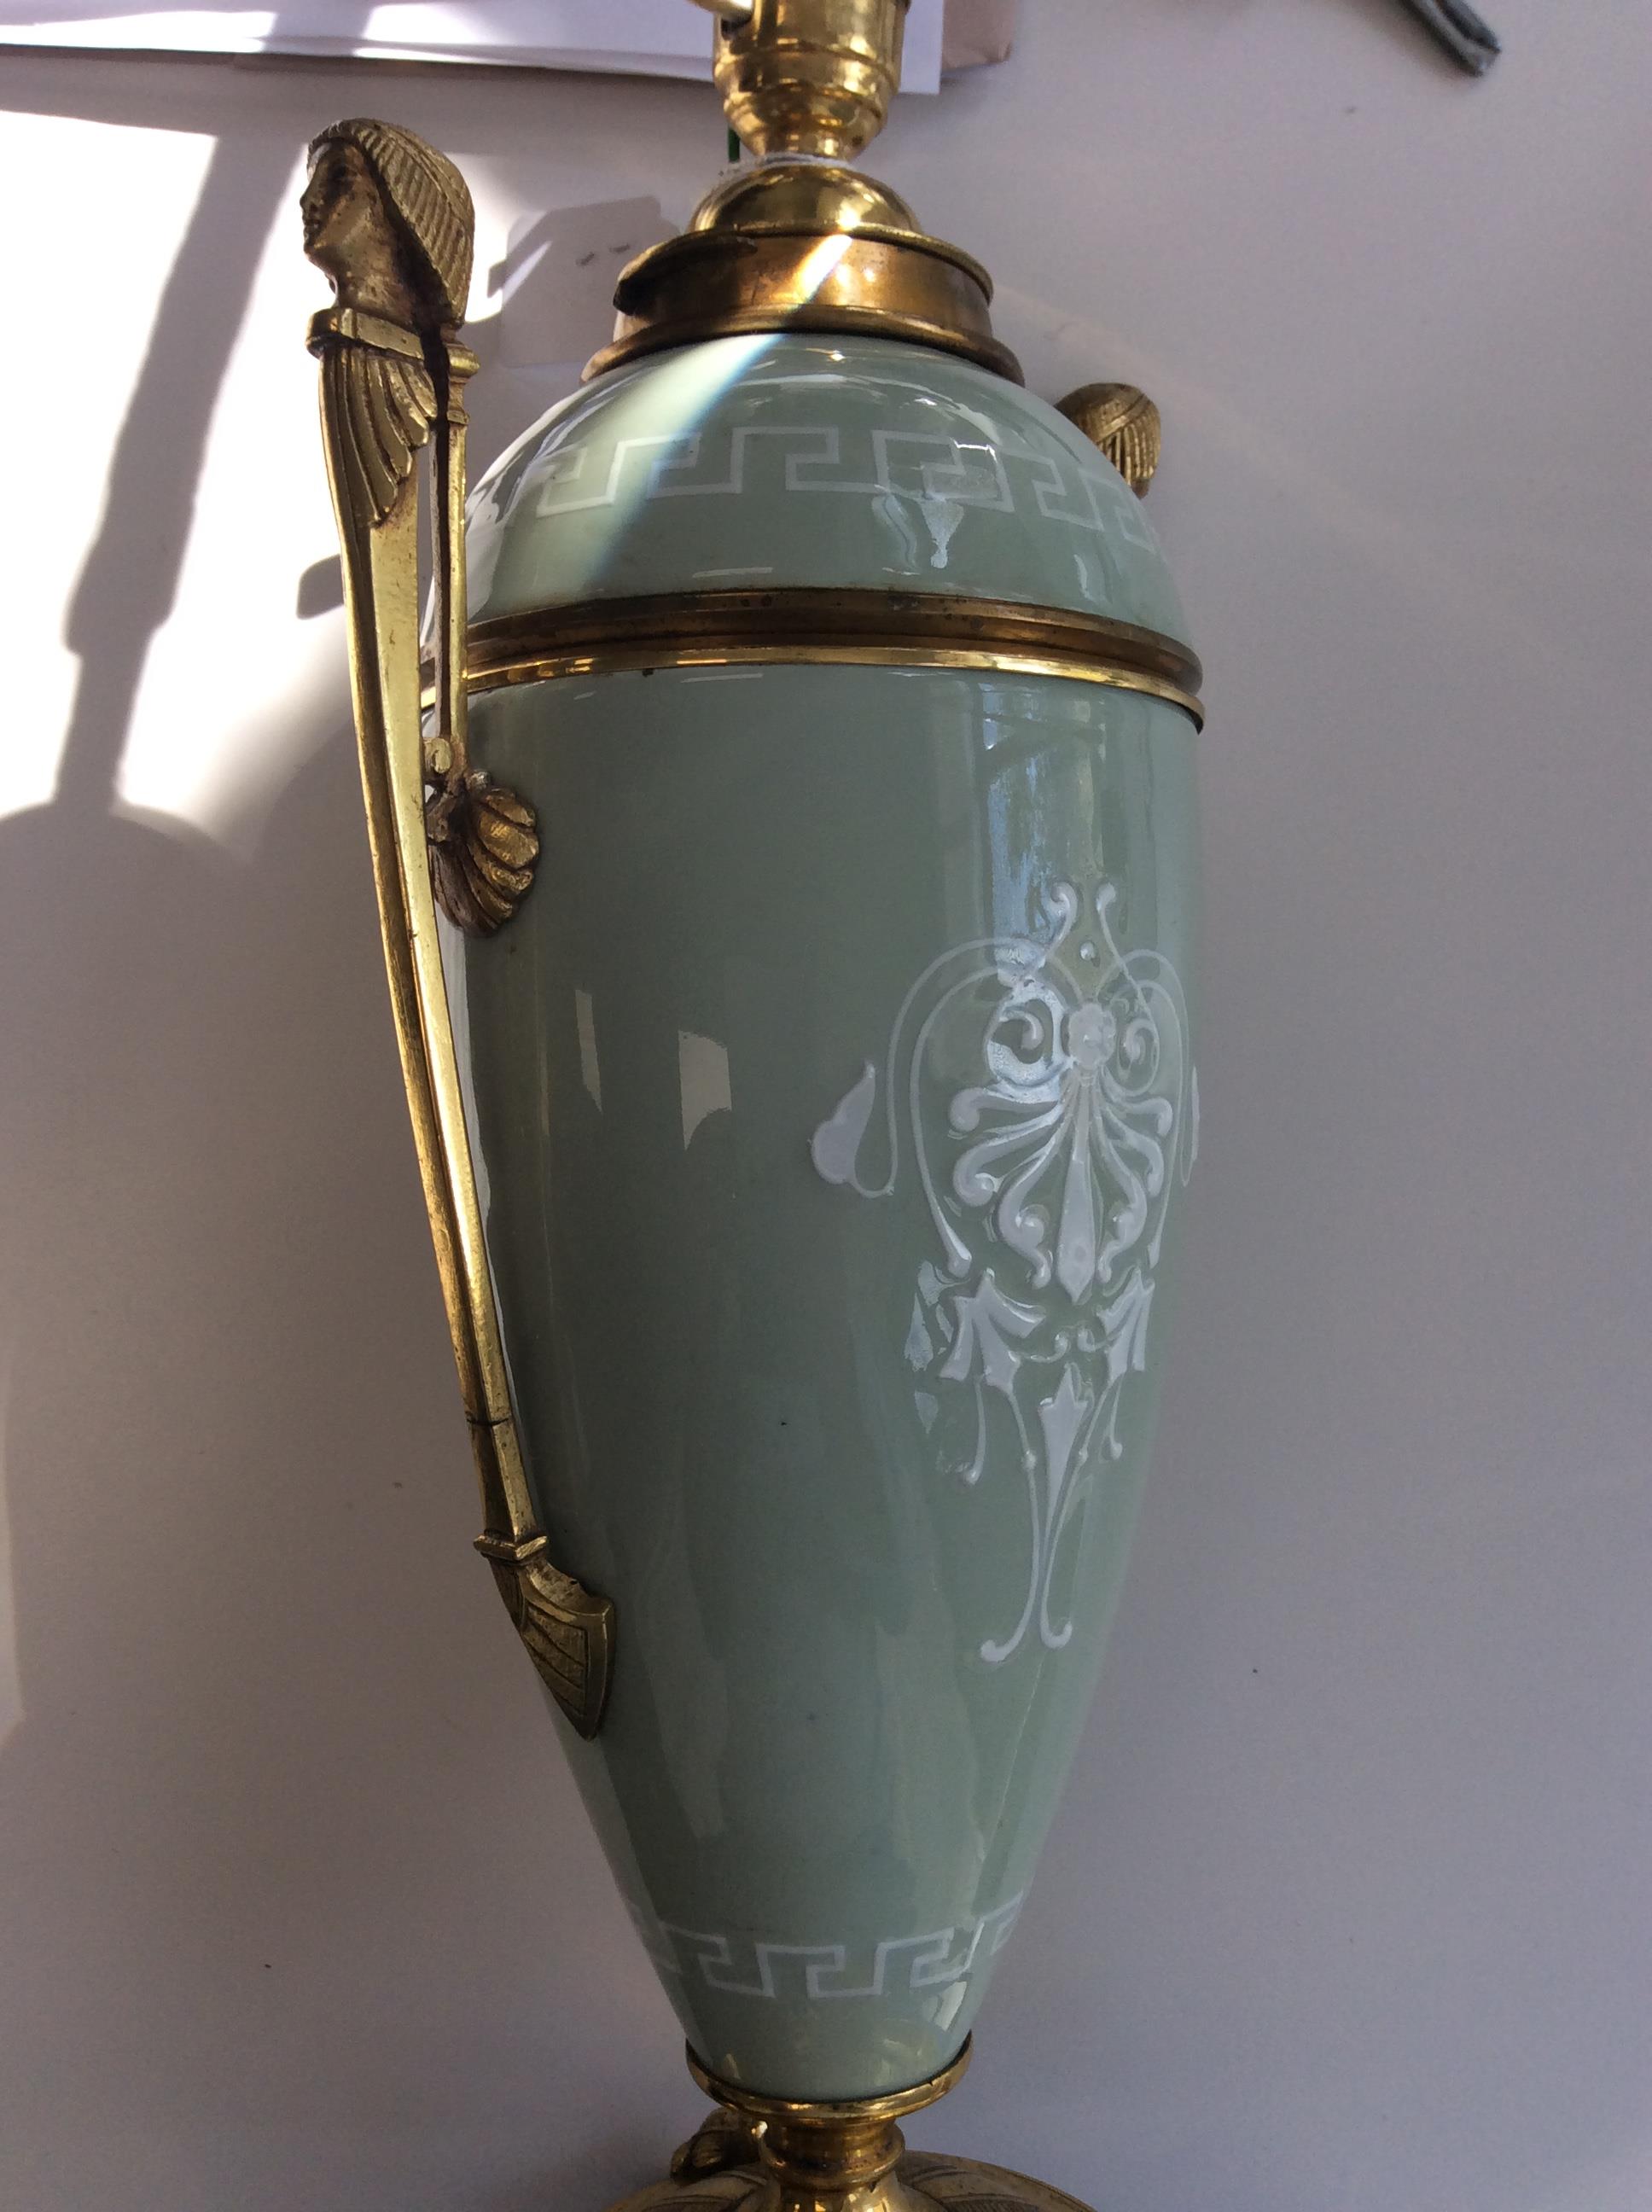 A late 19th century French pate-sur-pate ormolu mounted Empire style table lamp - Image 2 of 5